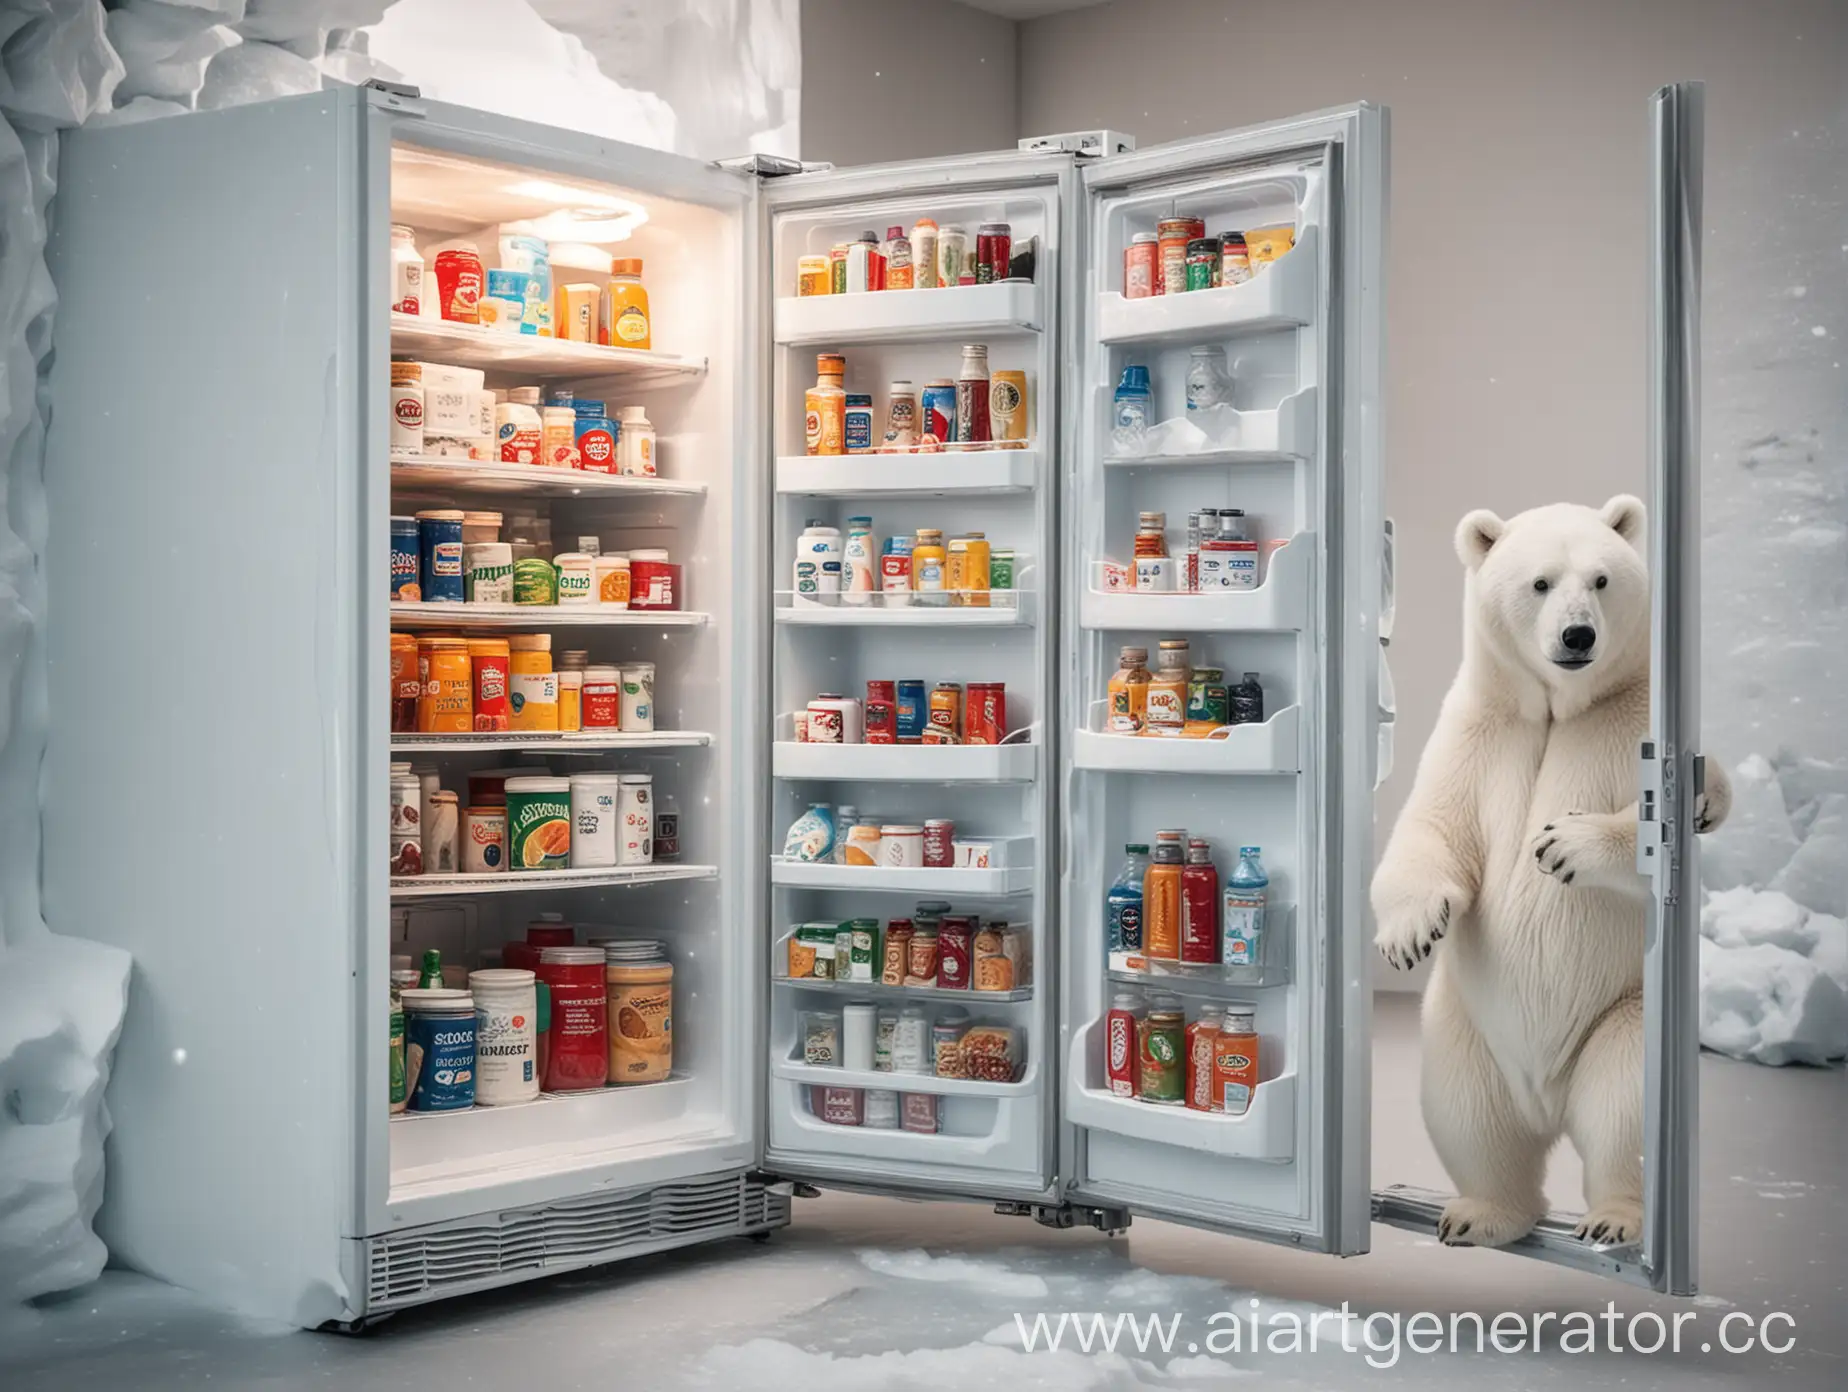 Arctic-Bear-Next-to-Open-Refrigerator-in-Ice